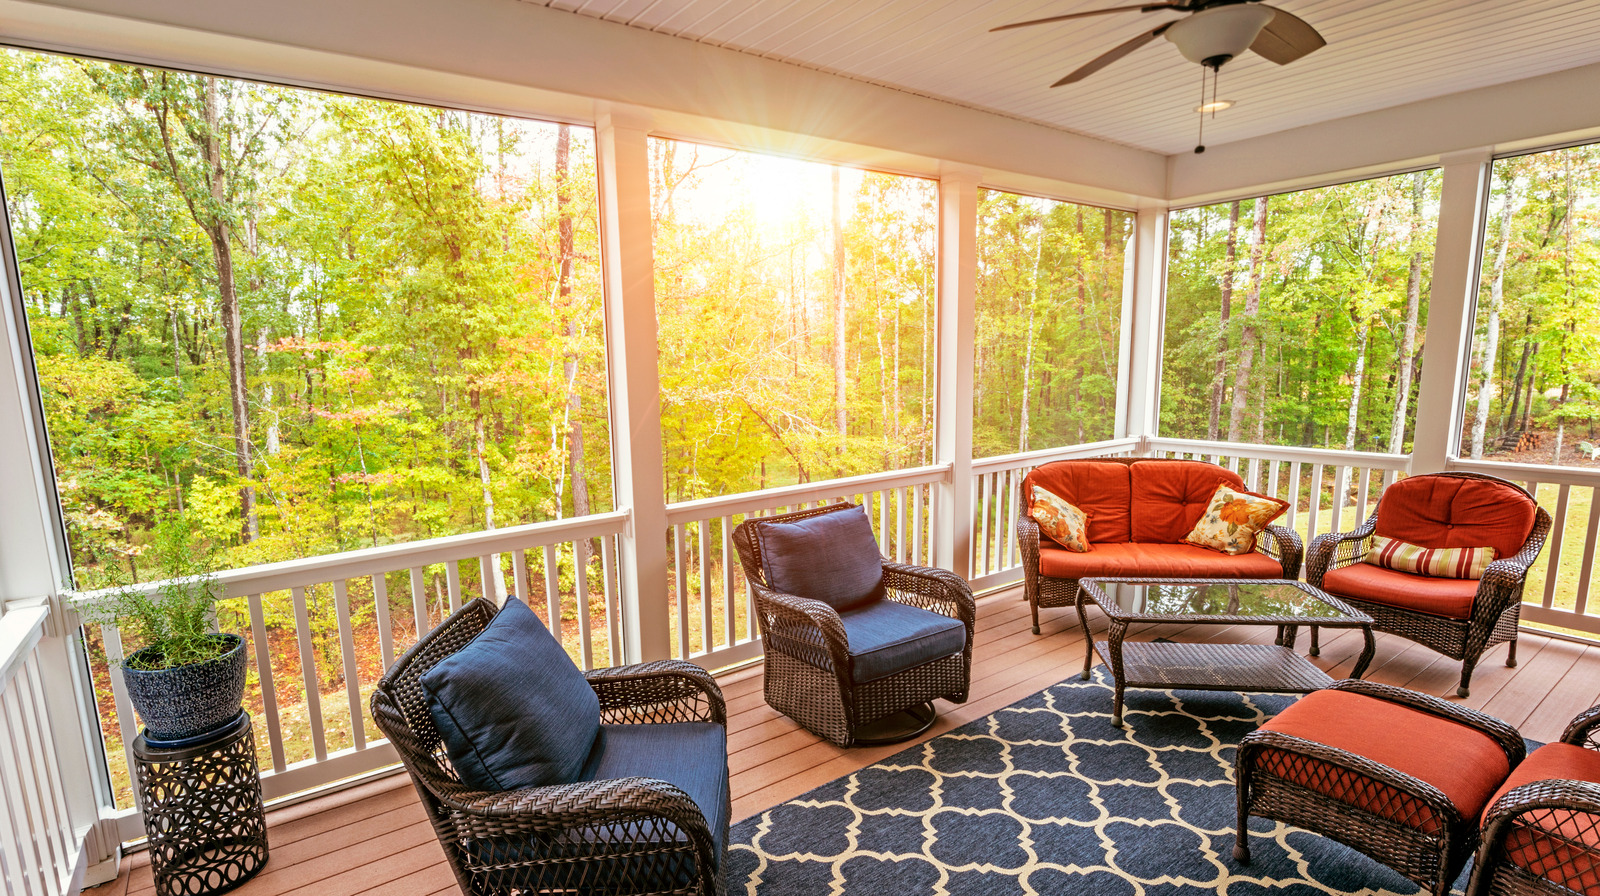 How Much Does It Cost To Build A Screened-In Porch?